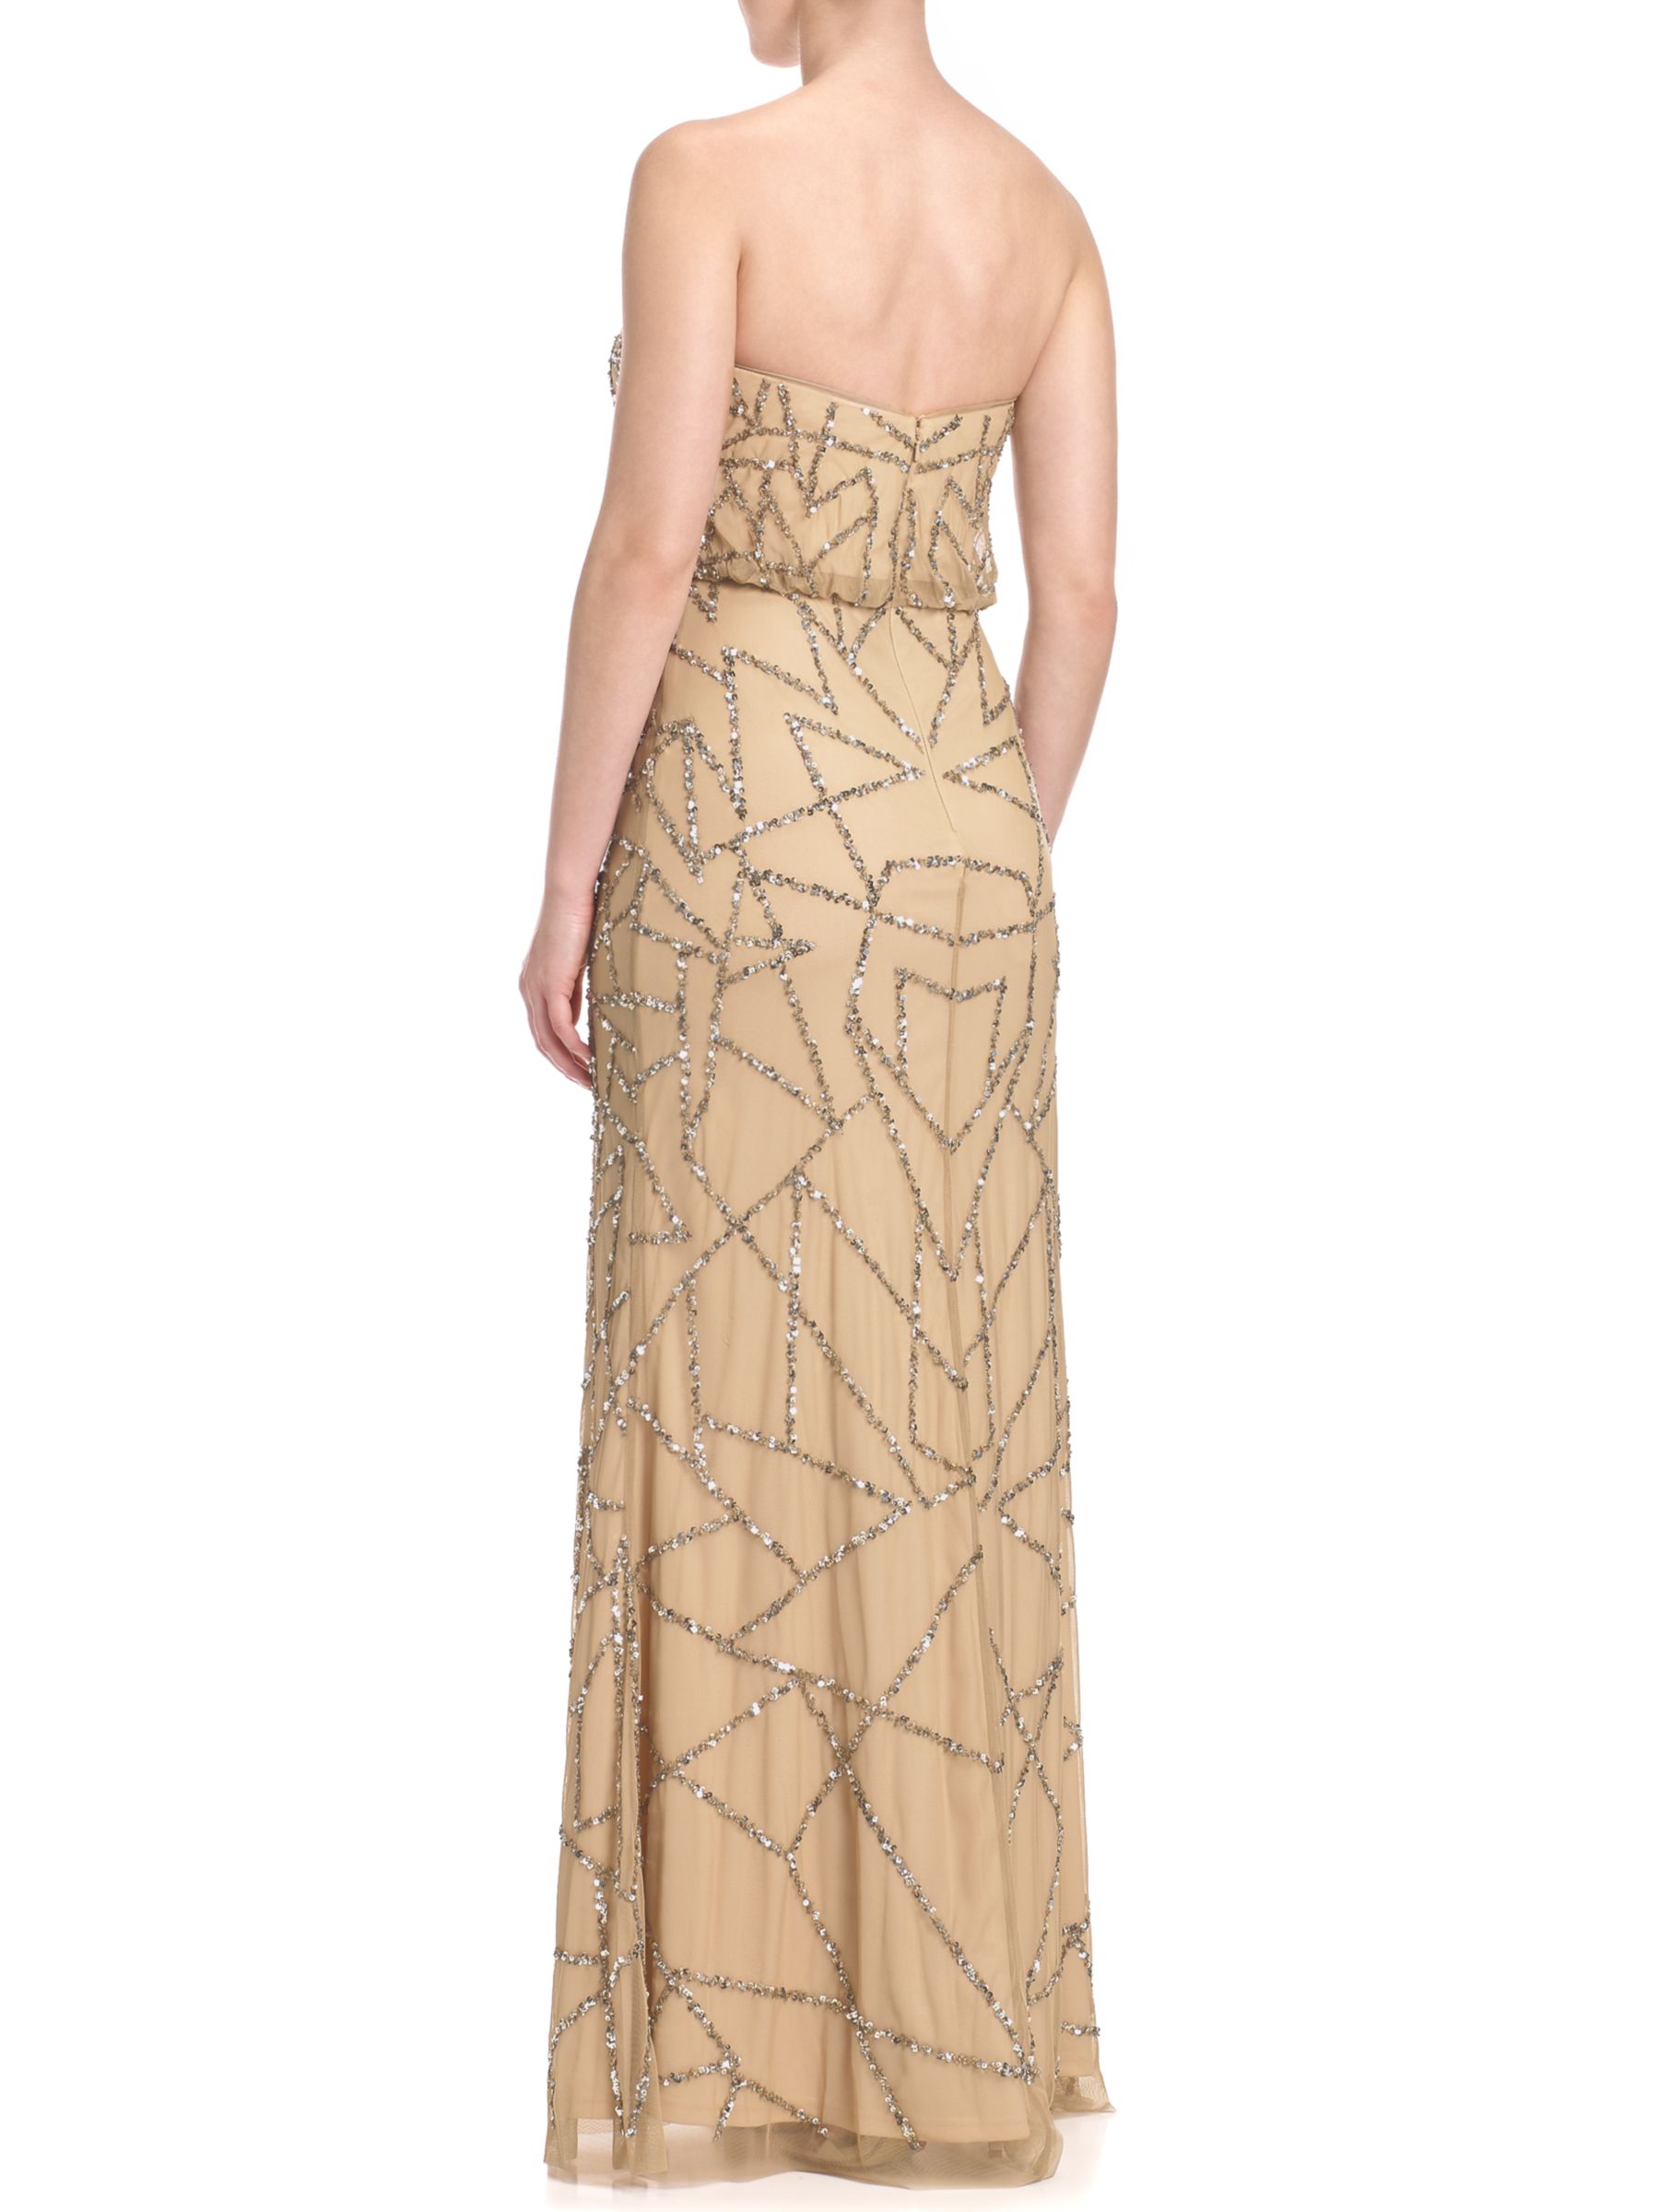 Adrianna Papell Wedding Long Beaded Dress Taupe Pink At